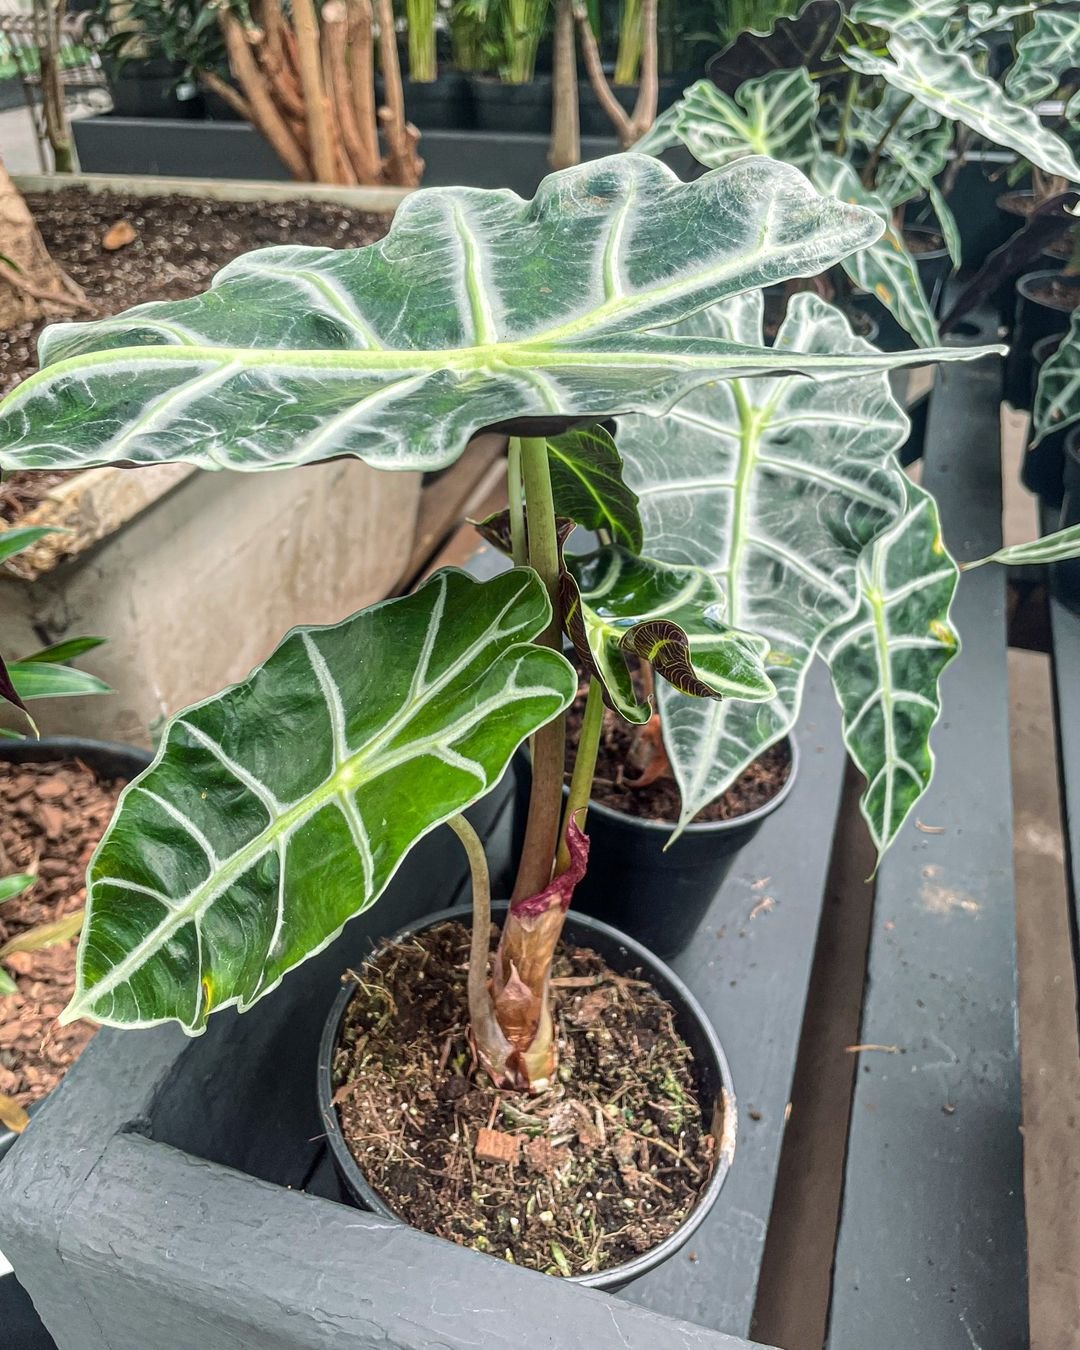 Alocasia Polly: A striking plant with dark green leaves and white veins, adding a touch of elegance to any indoor space.